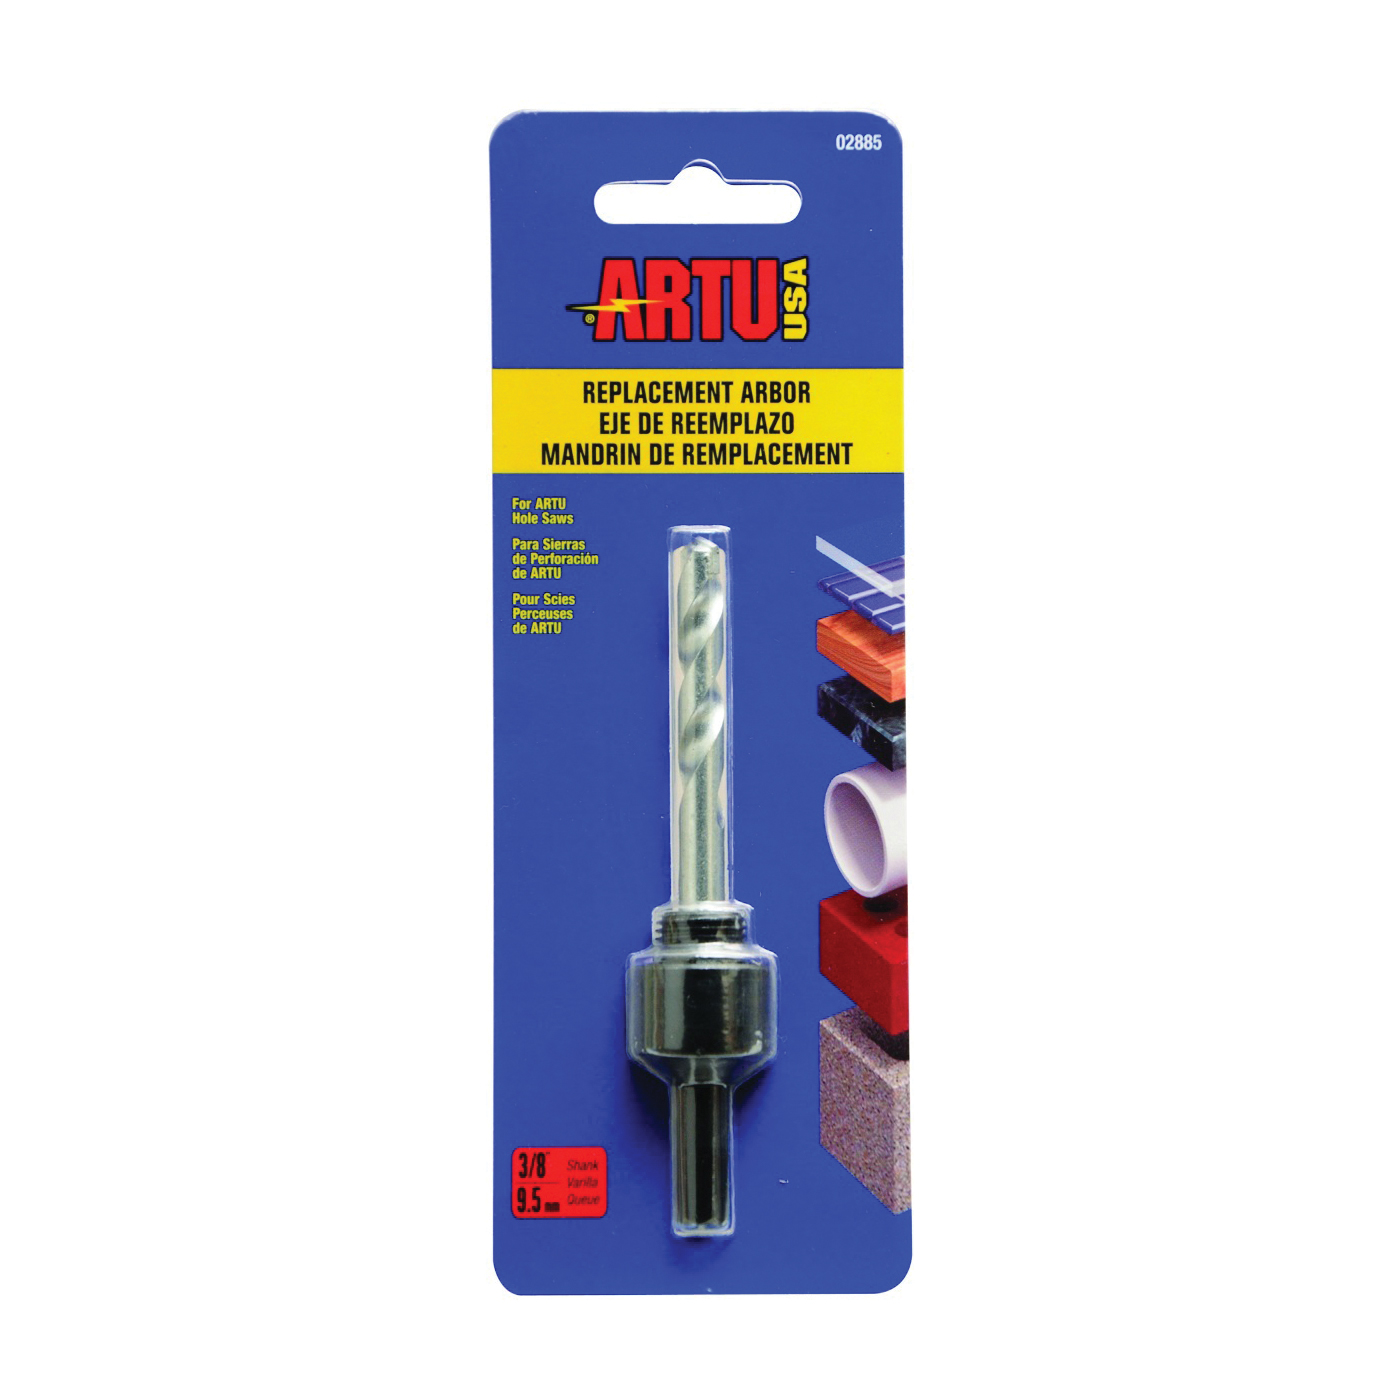 02885 Replacement Arbor and Pilot Bit, 5/8-18 Thread, 3/8 in Shank, Hex Shank